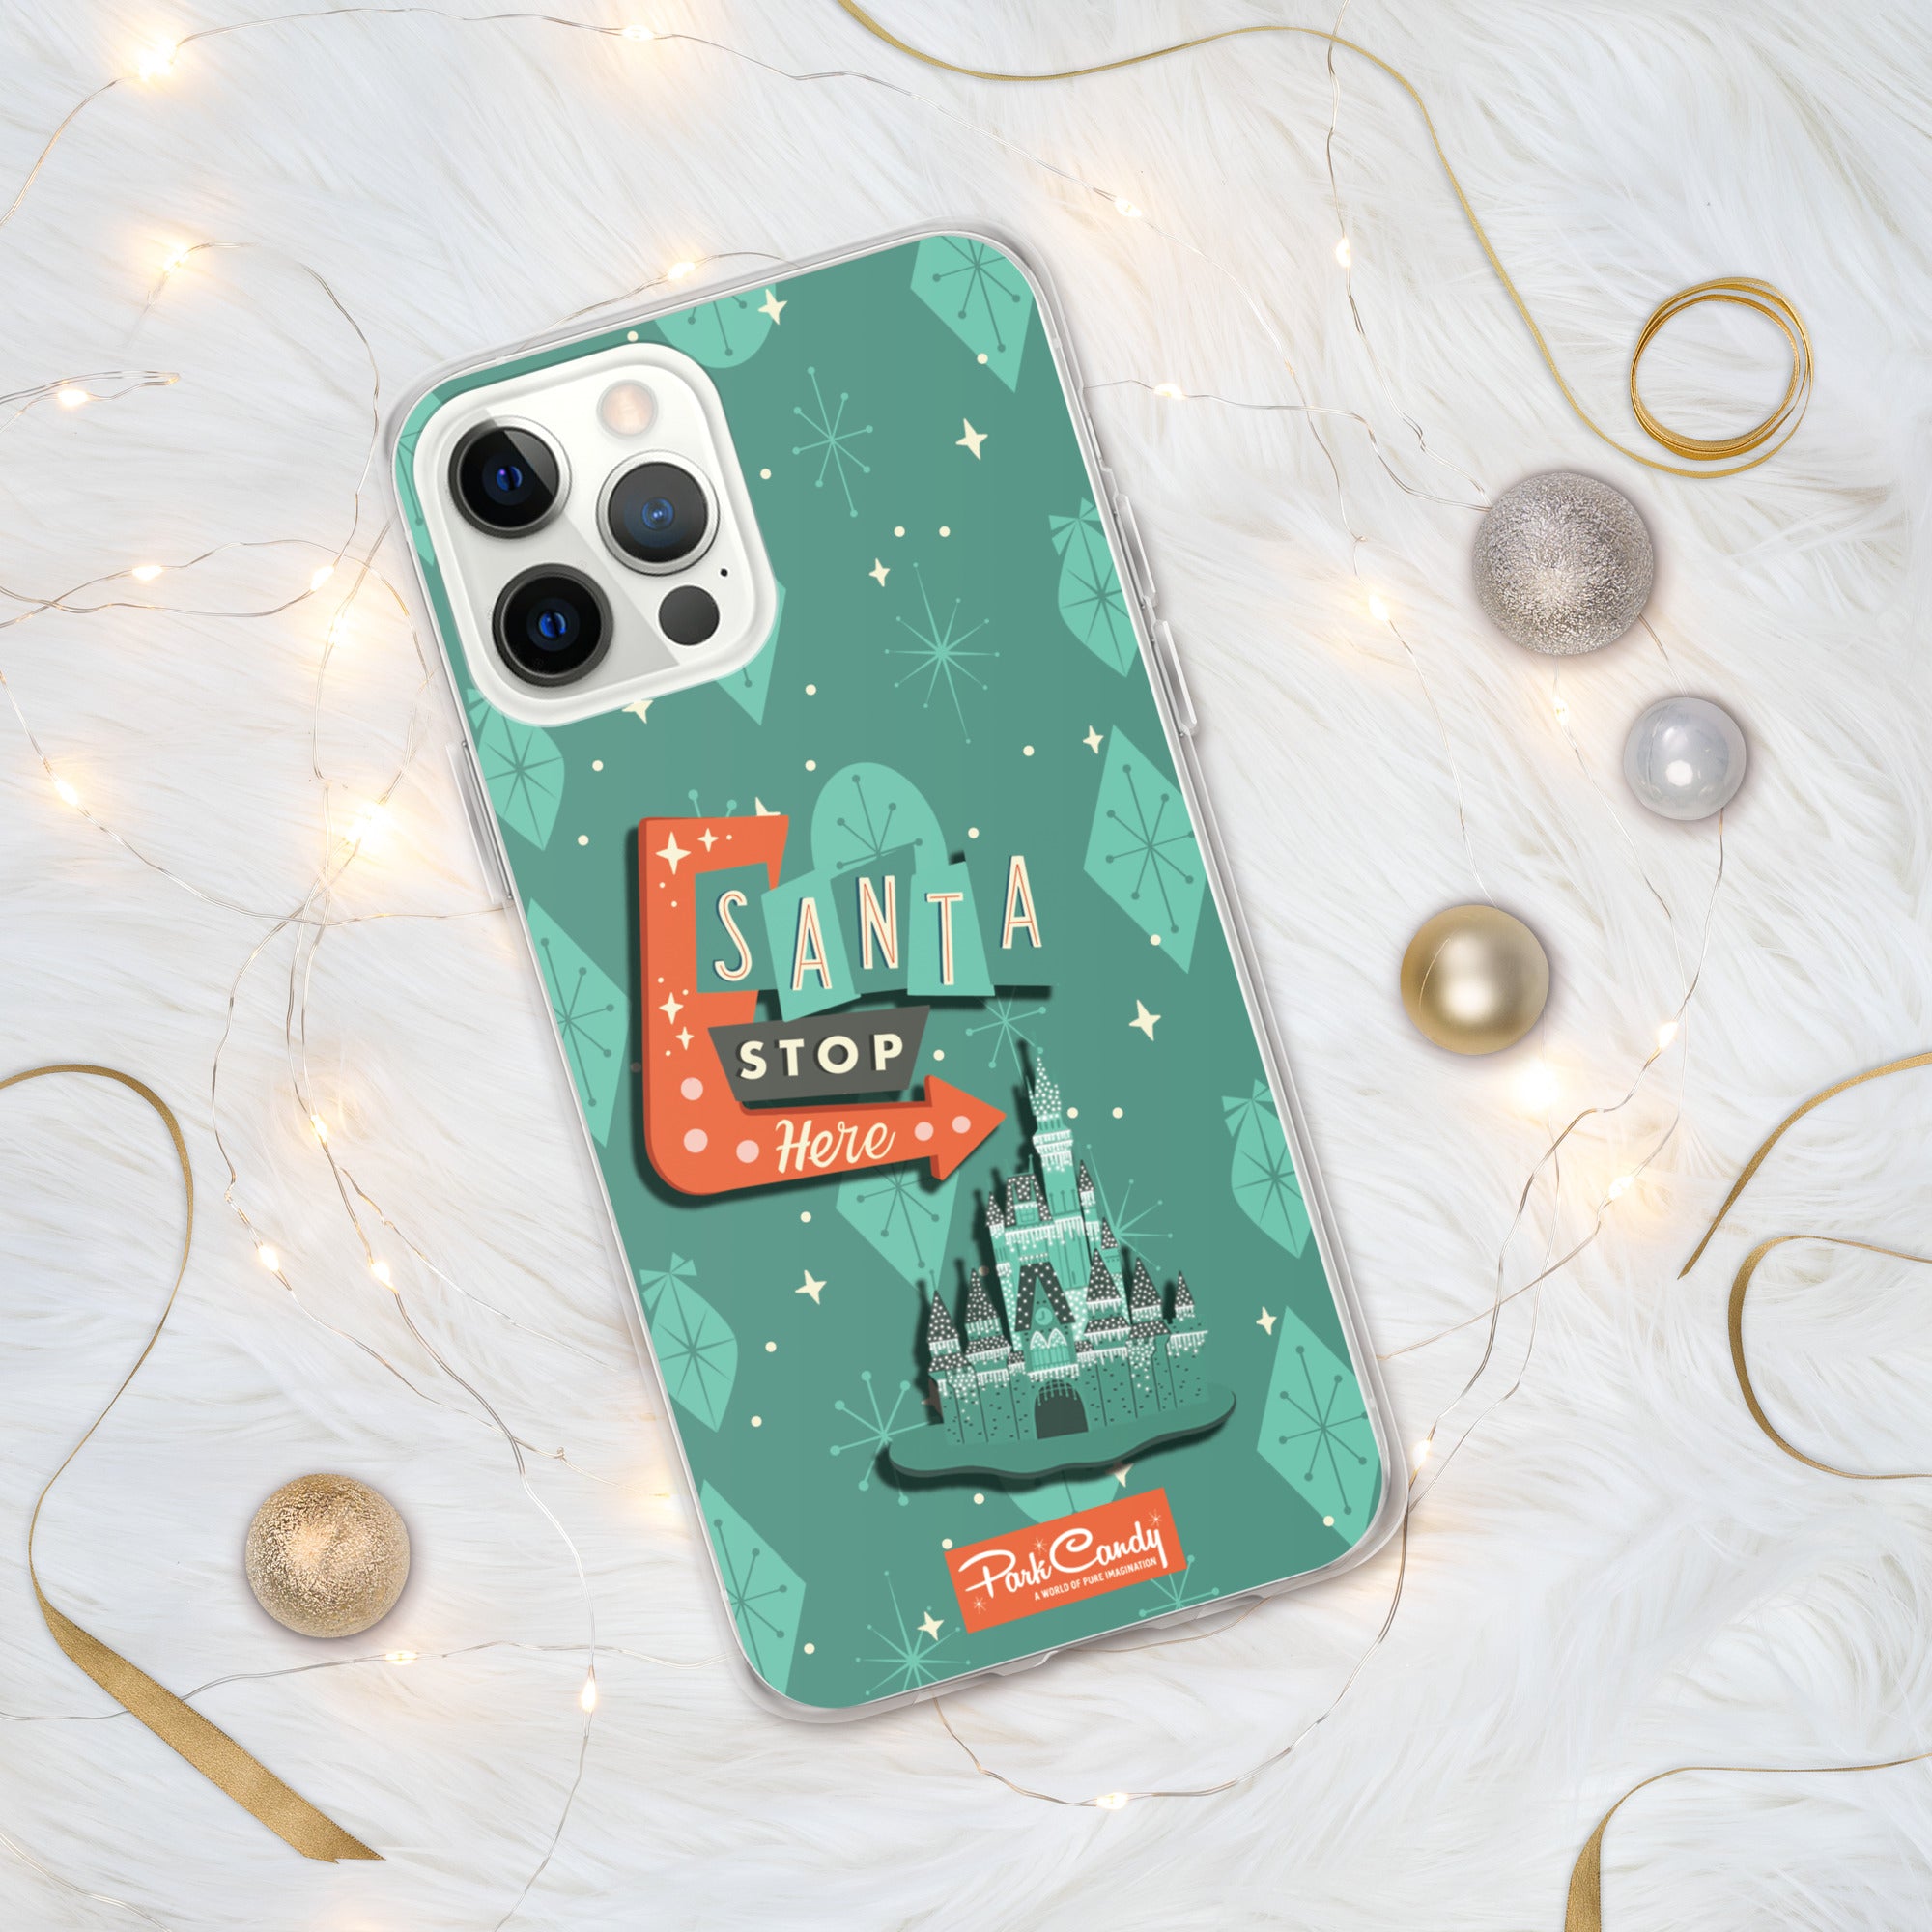 Santa Stop Here iPhone Case - Park Candy